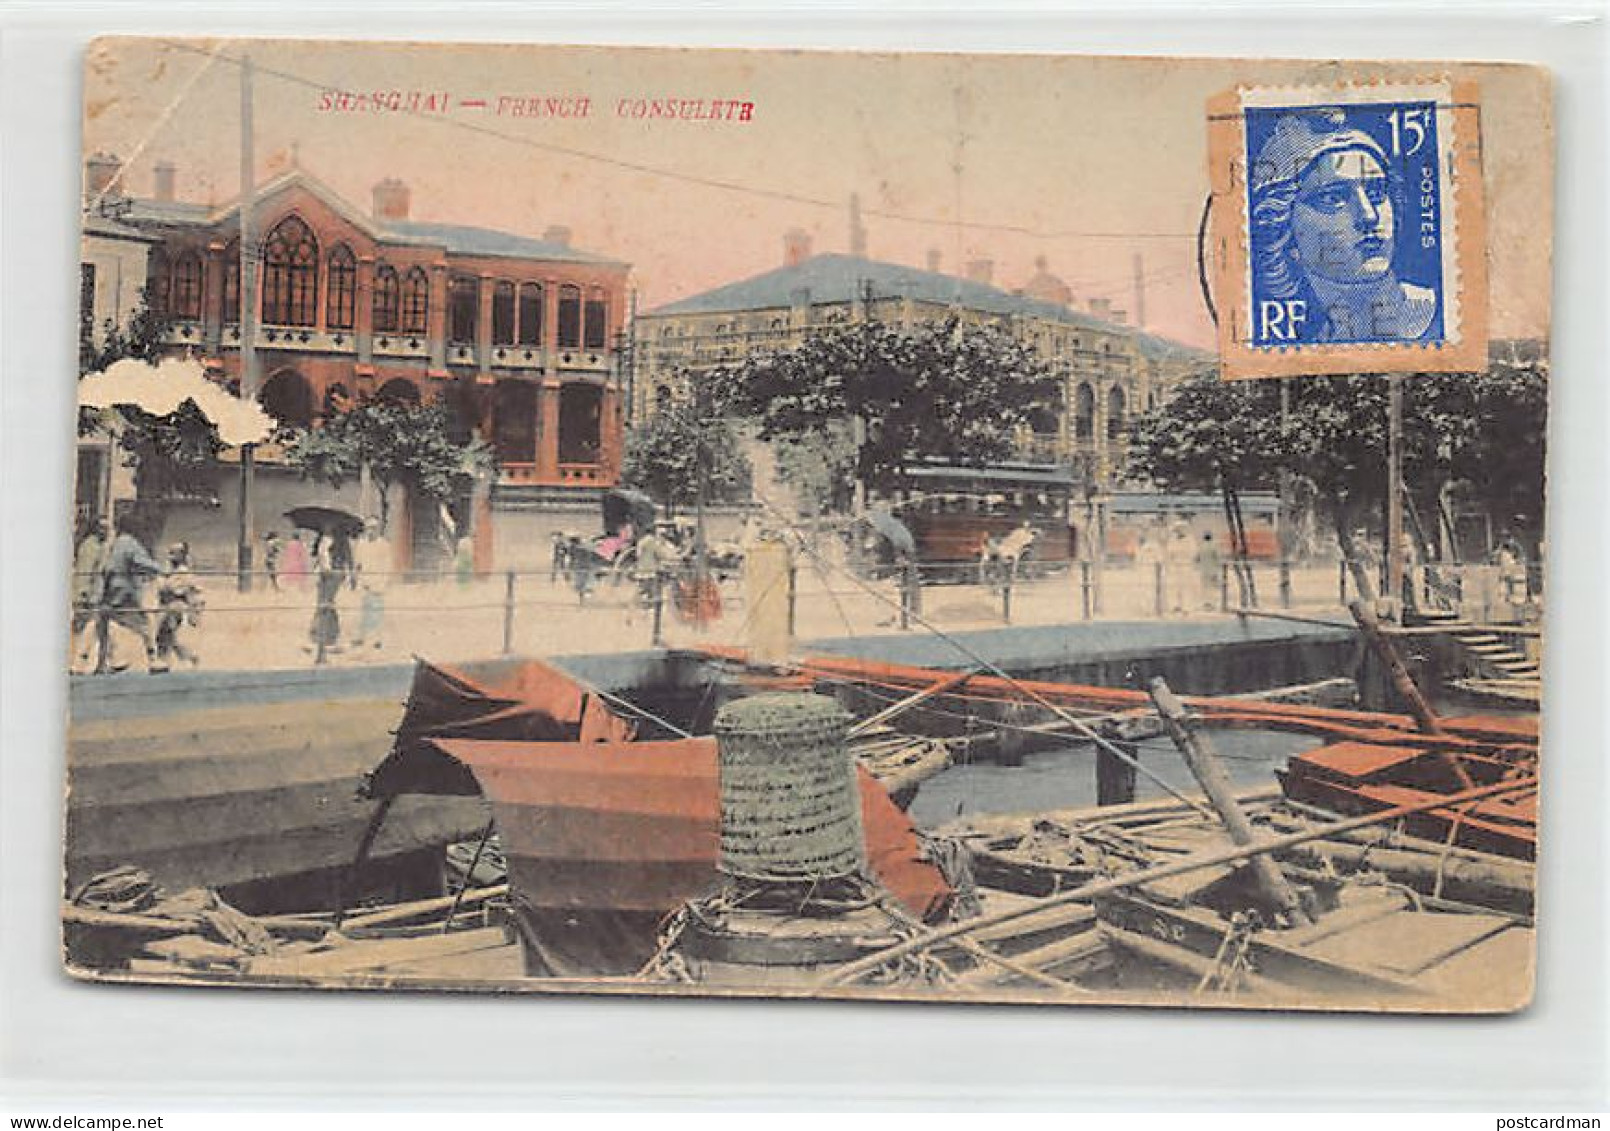 China - SHANGHAI - French Consulate (french Stamp Added Afterwards) SEE SCANS FOR CONDITION - Publ. Unknown  - China